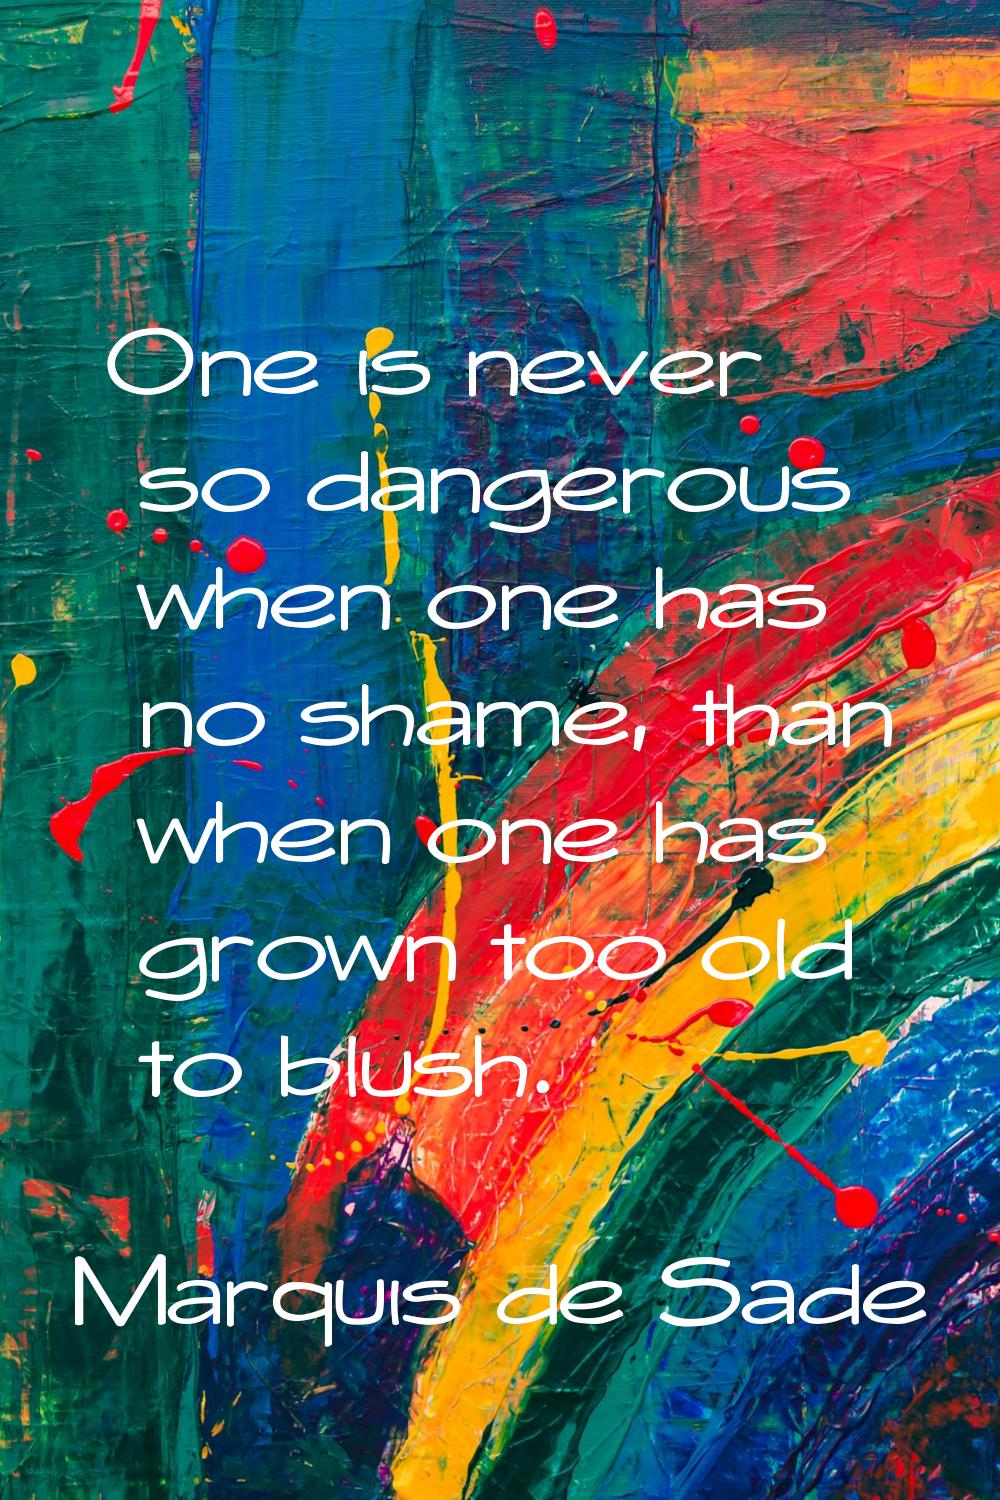 One is never so dangerous when one has no shame, than when one has grown too old to blush.